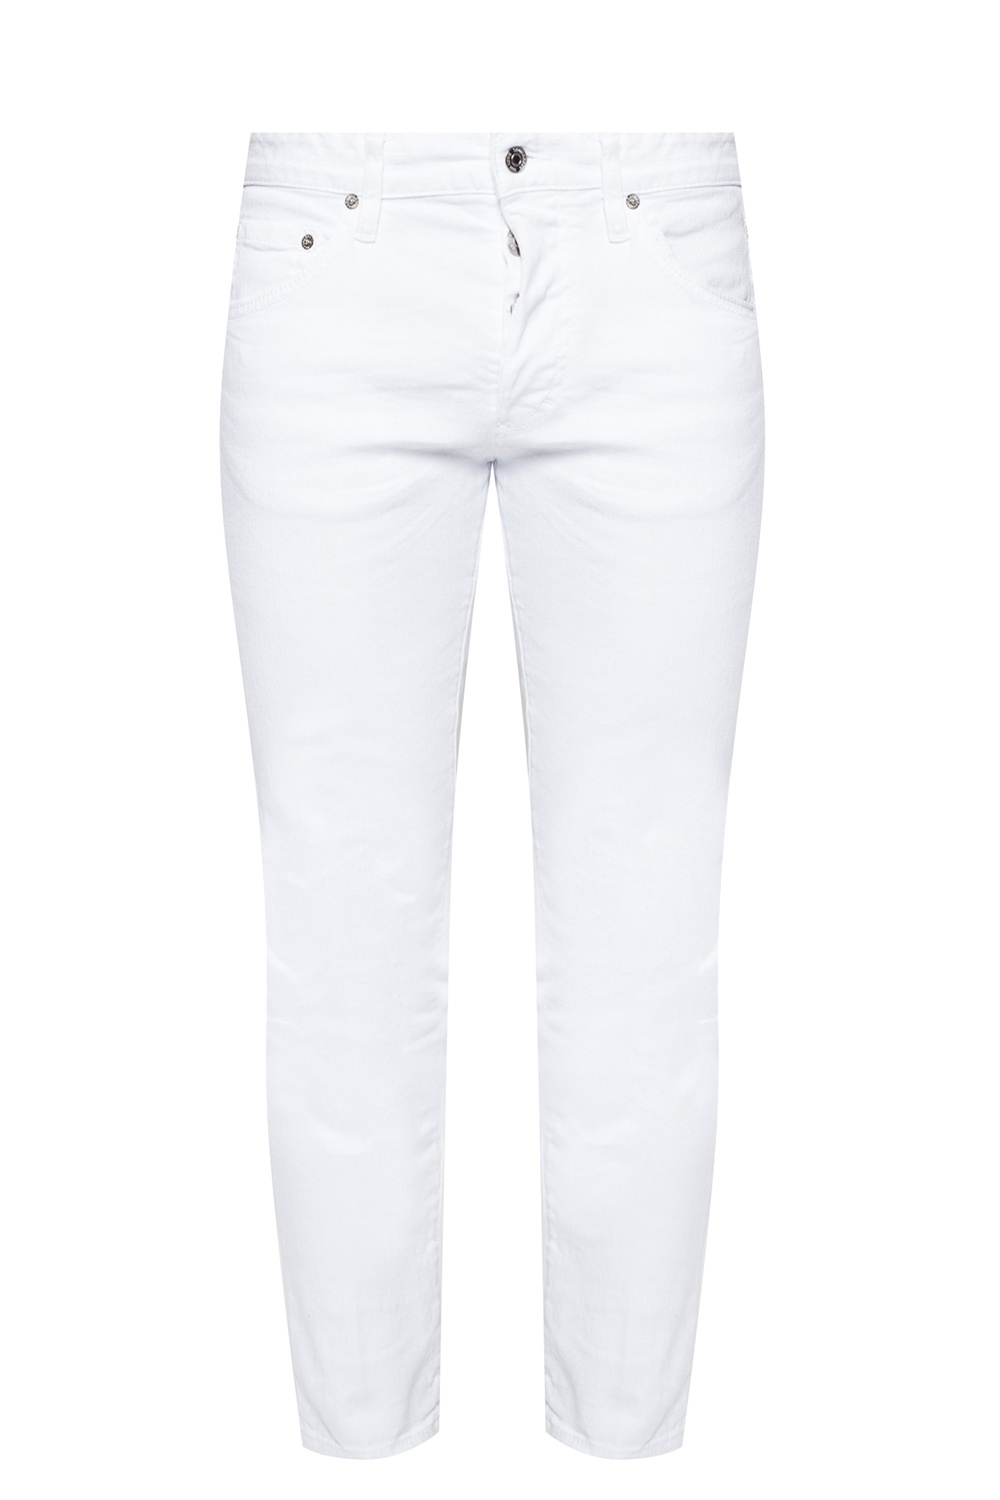 dsquared white jeans